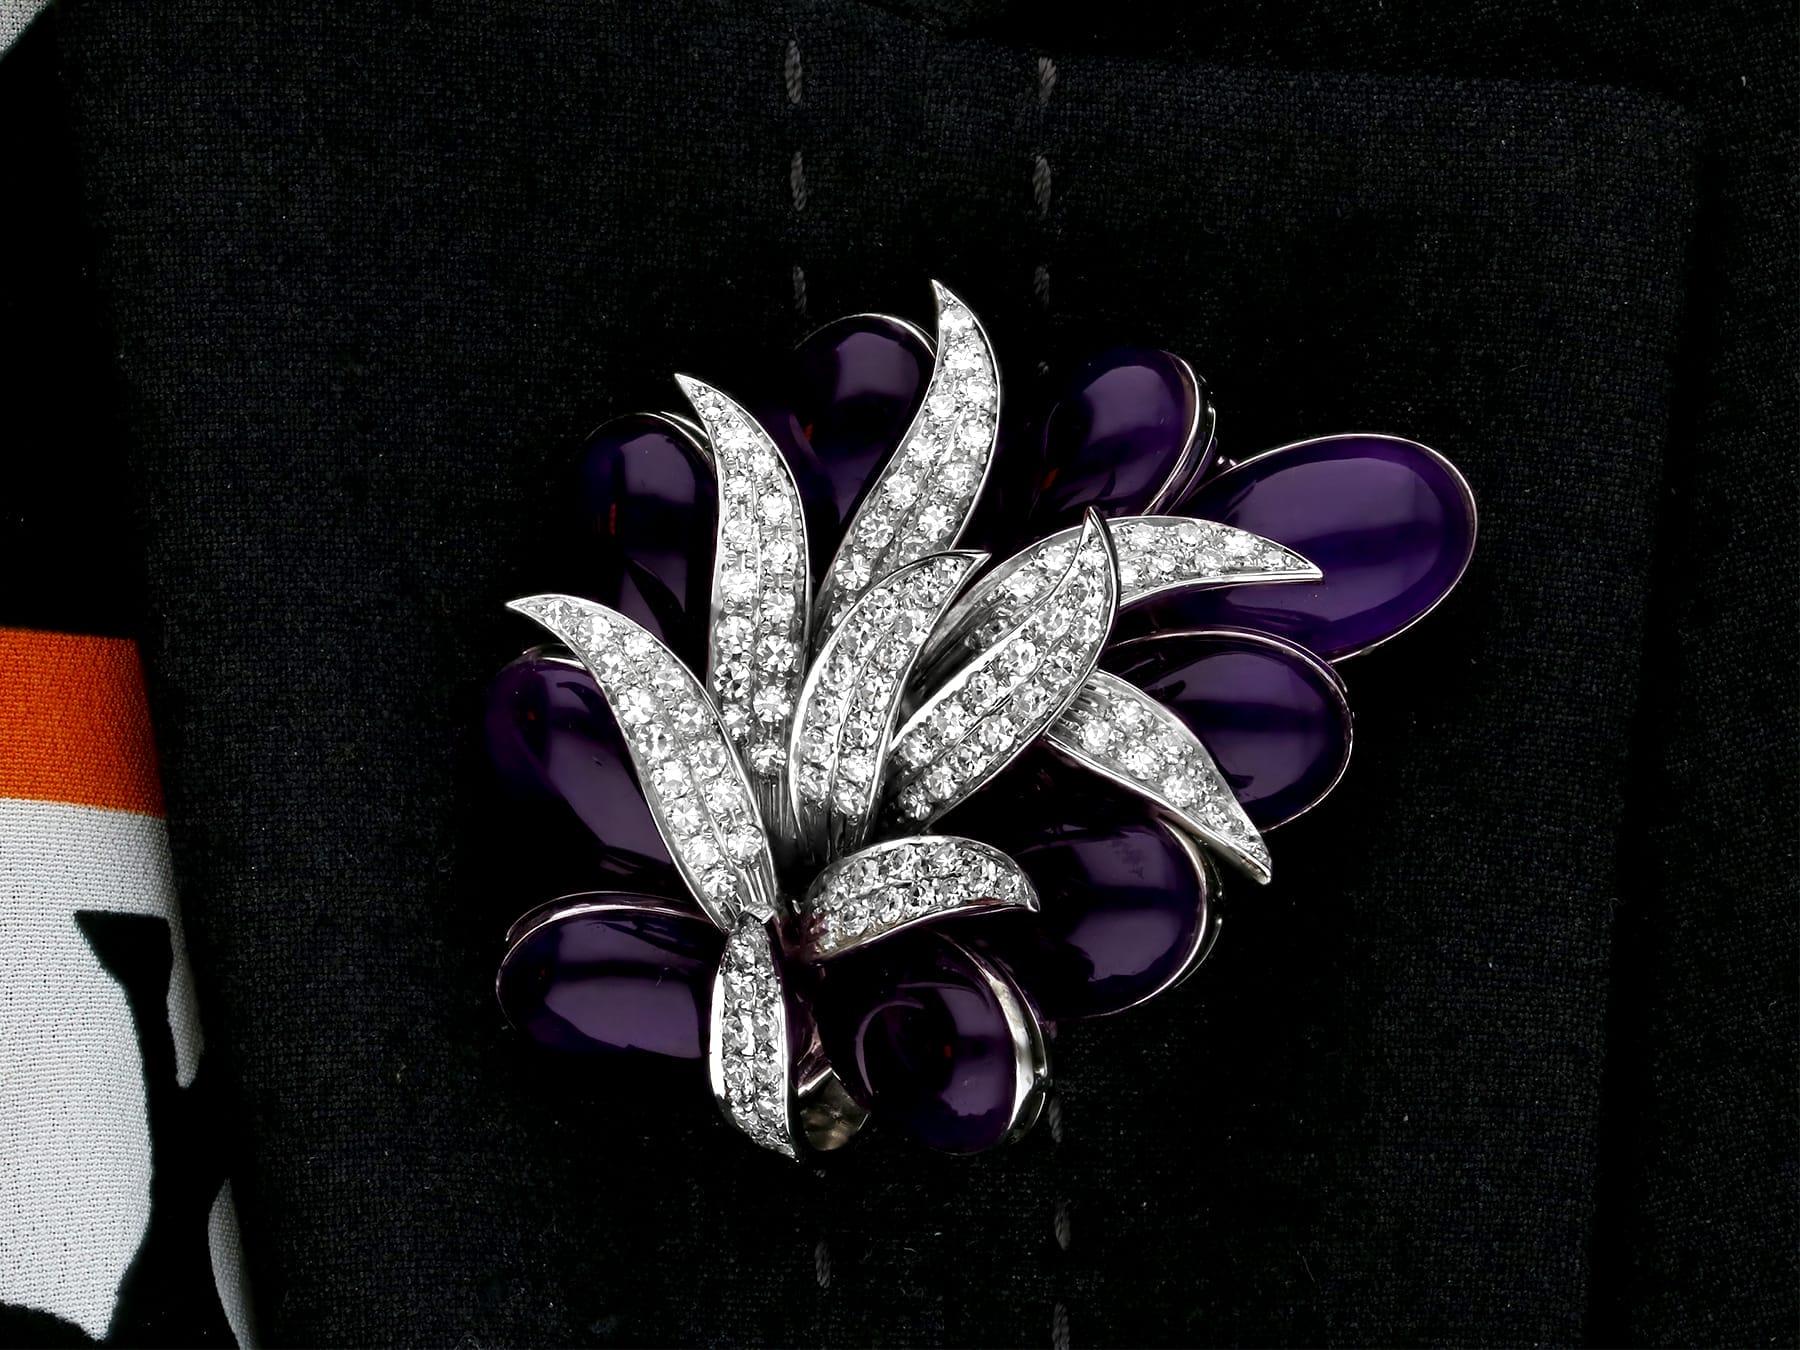 Vintage 55Ct Amethyst and 3.02Ct Diamond 18k White Gold Brooch Circa 1950 For Sale 4